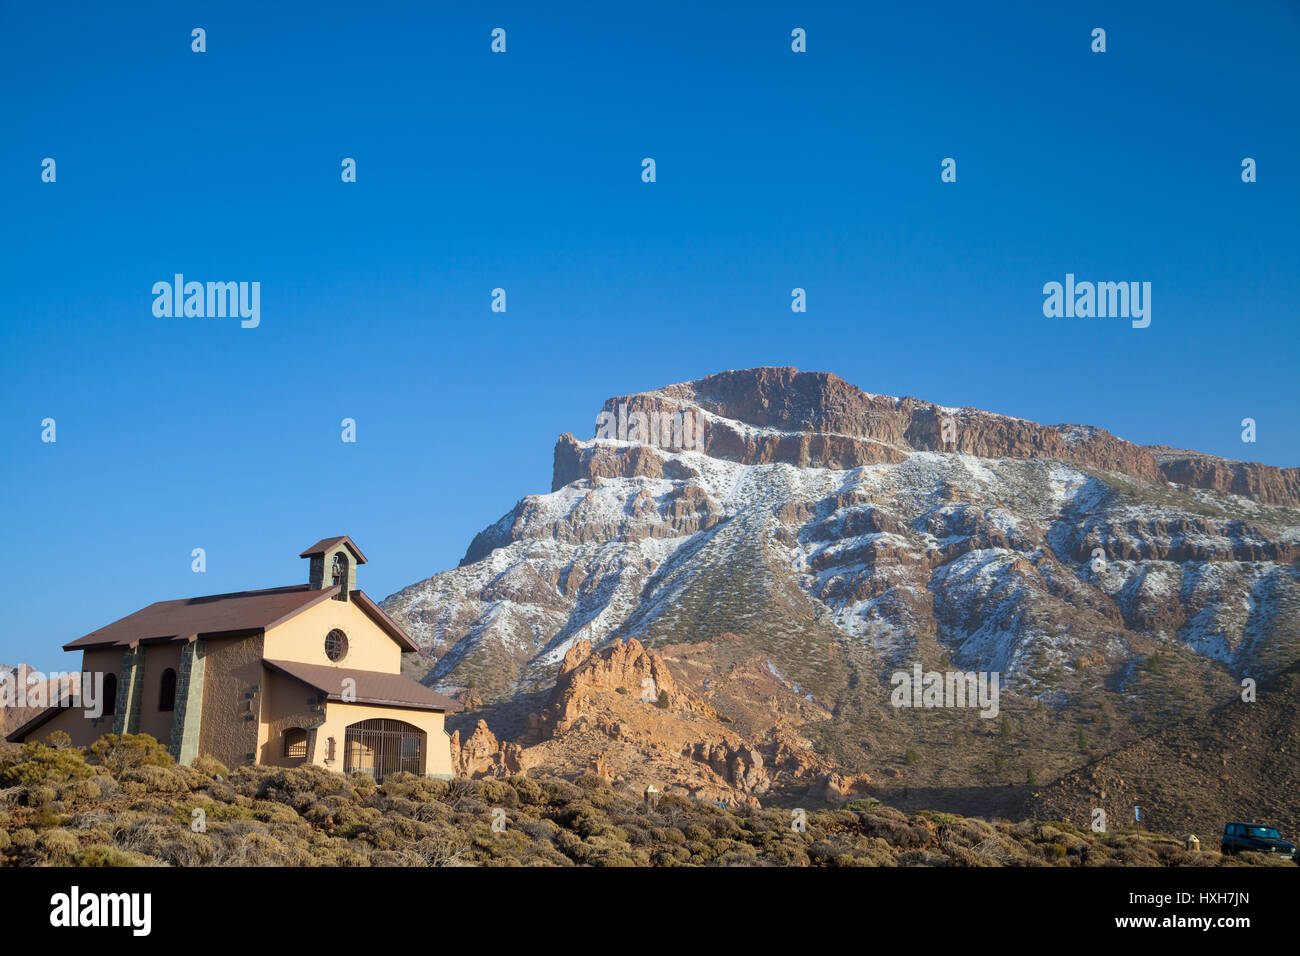 Church in the middle of the crater, Teide National Park, Tenerife Island Stock Photo